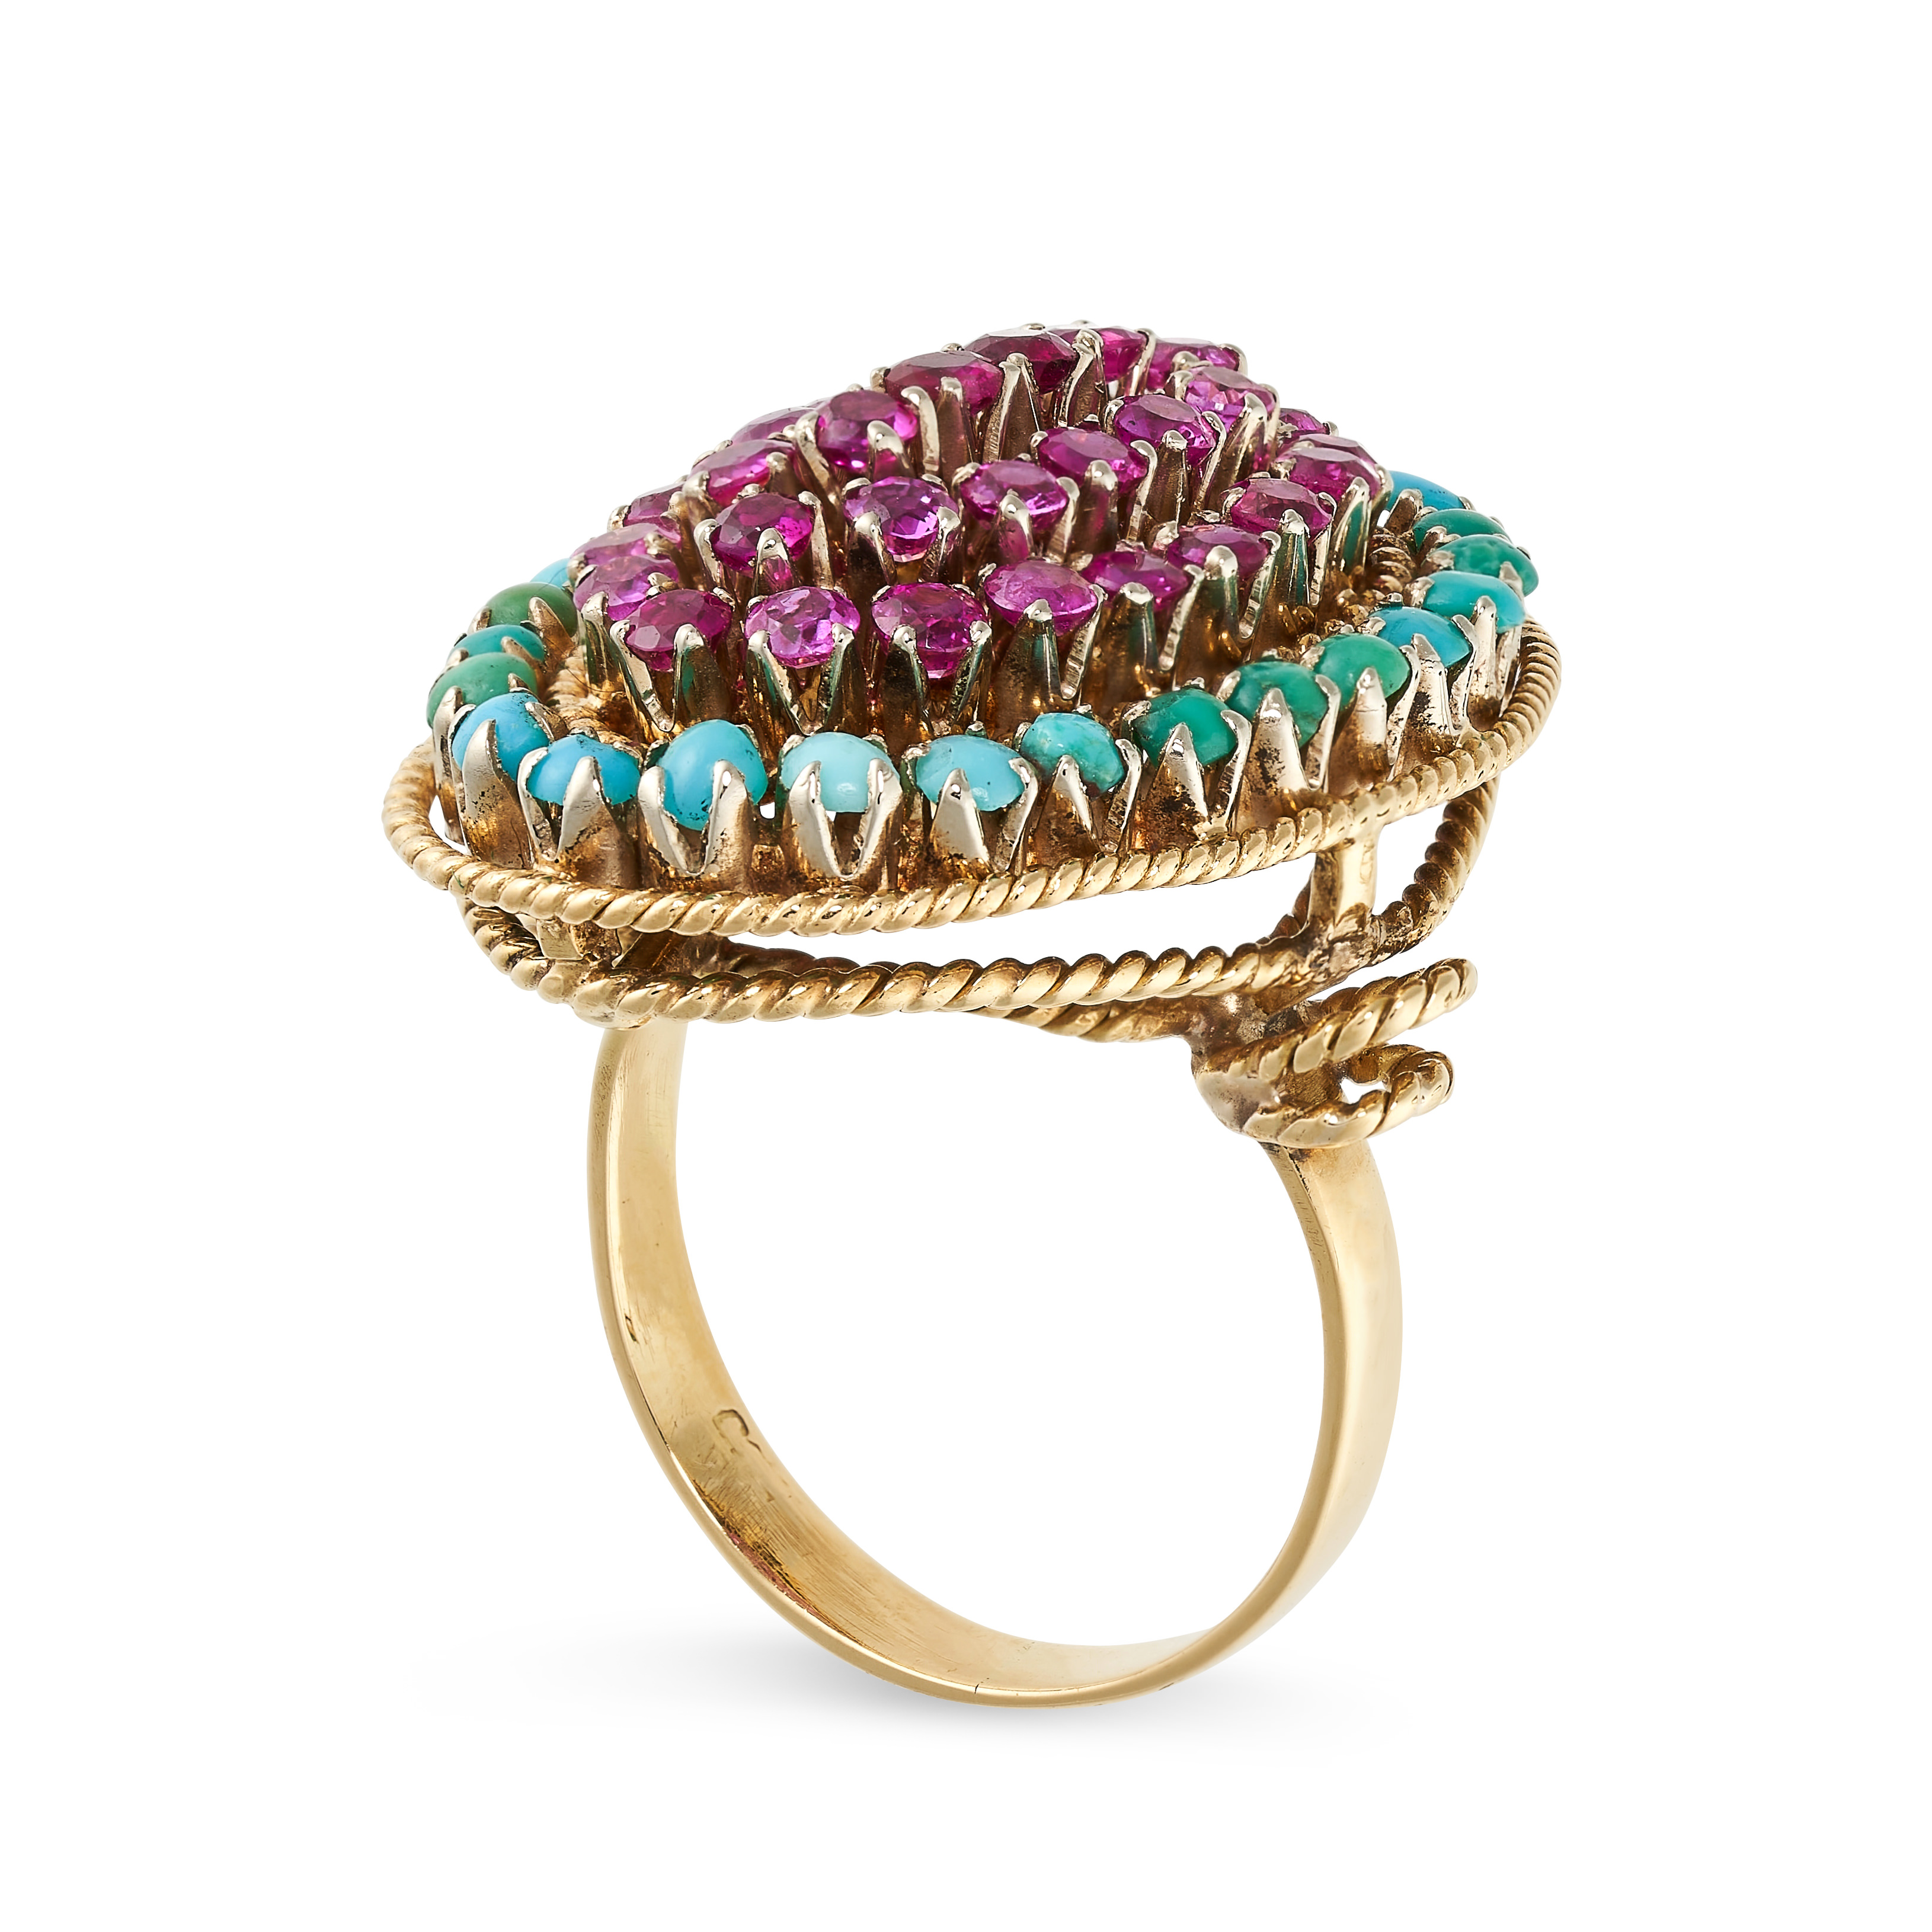 A BURMA NO HEAT RUBY AND TURQUOISE DRESS RING the oval face pave set with round cut rubies in a - Image 2 of 2